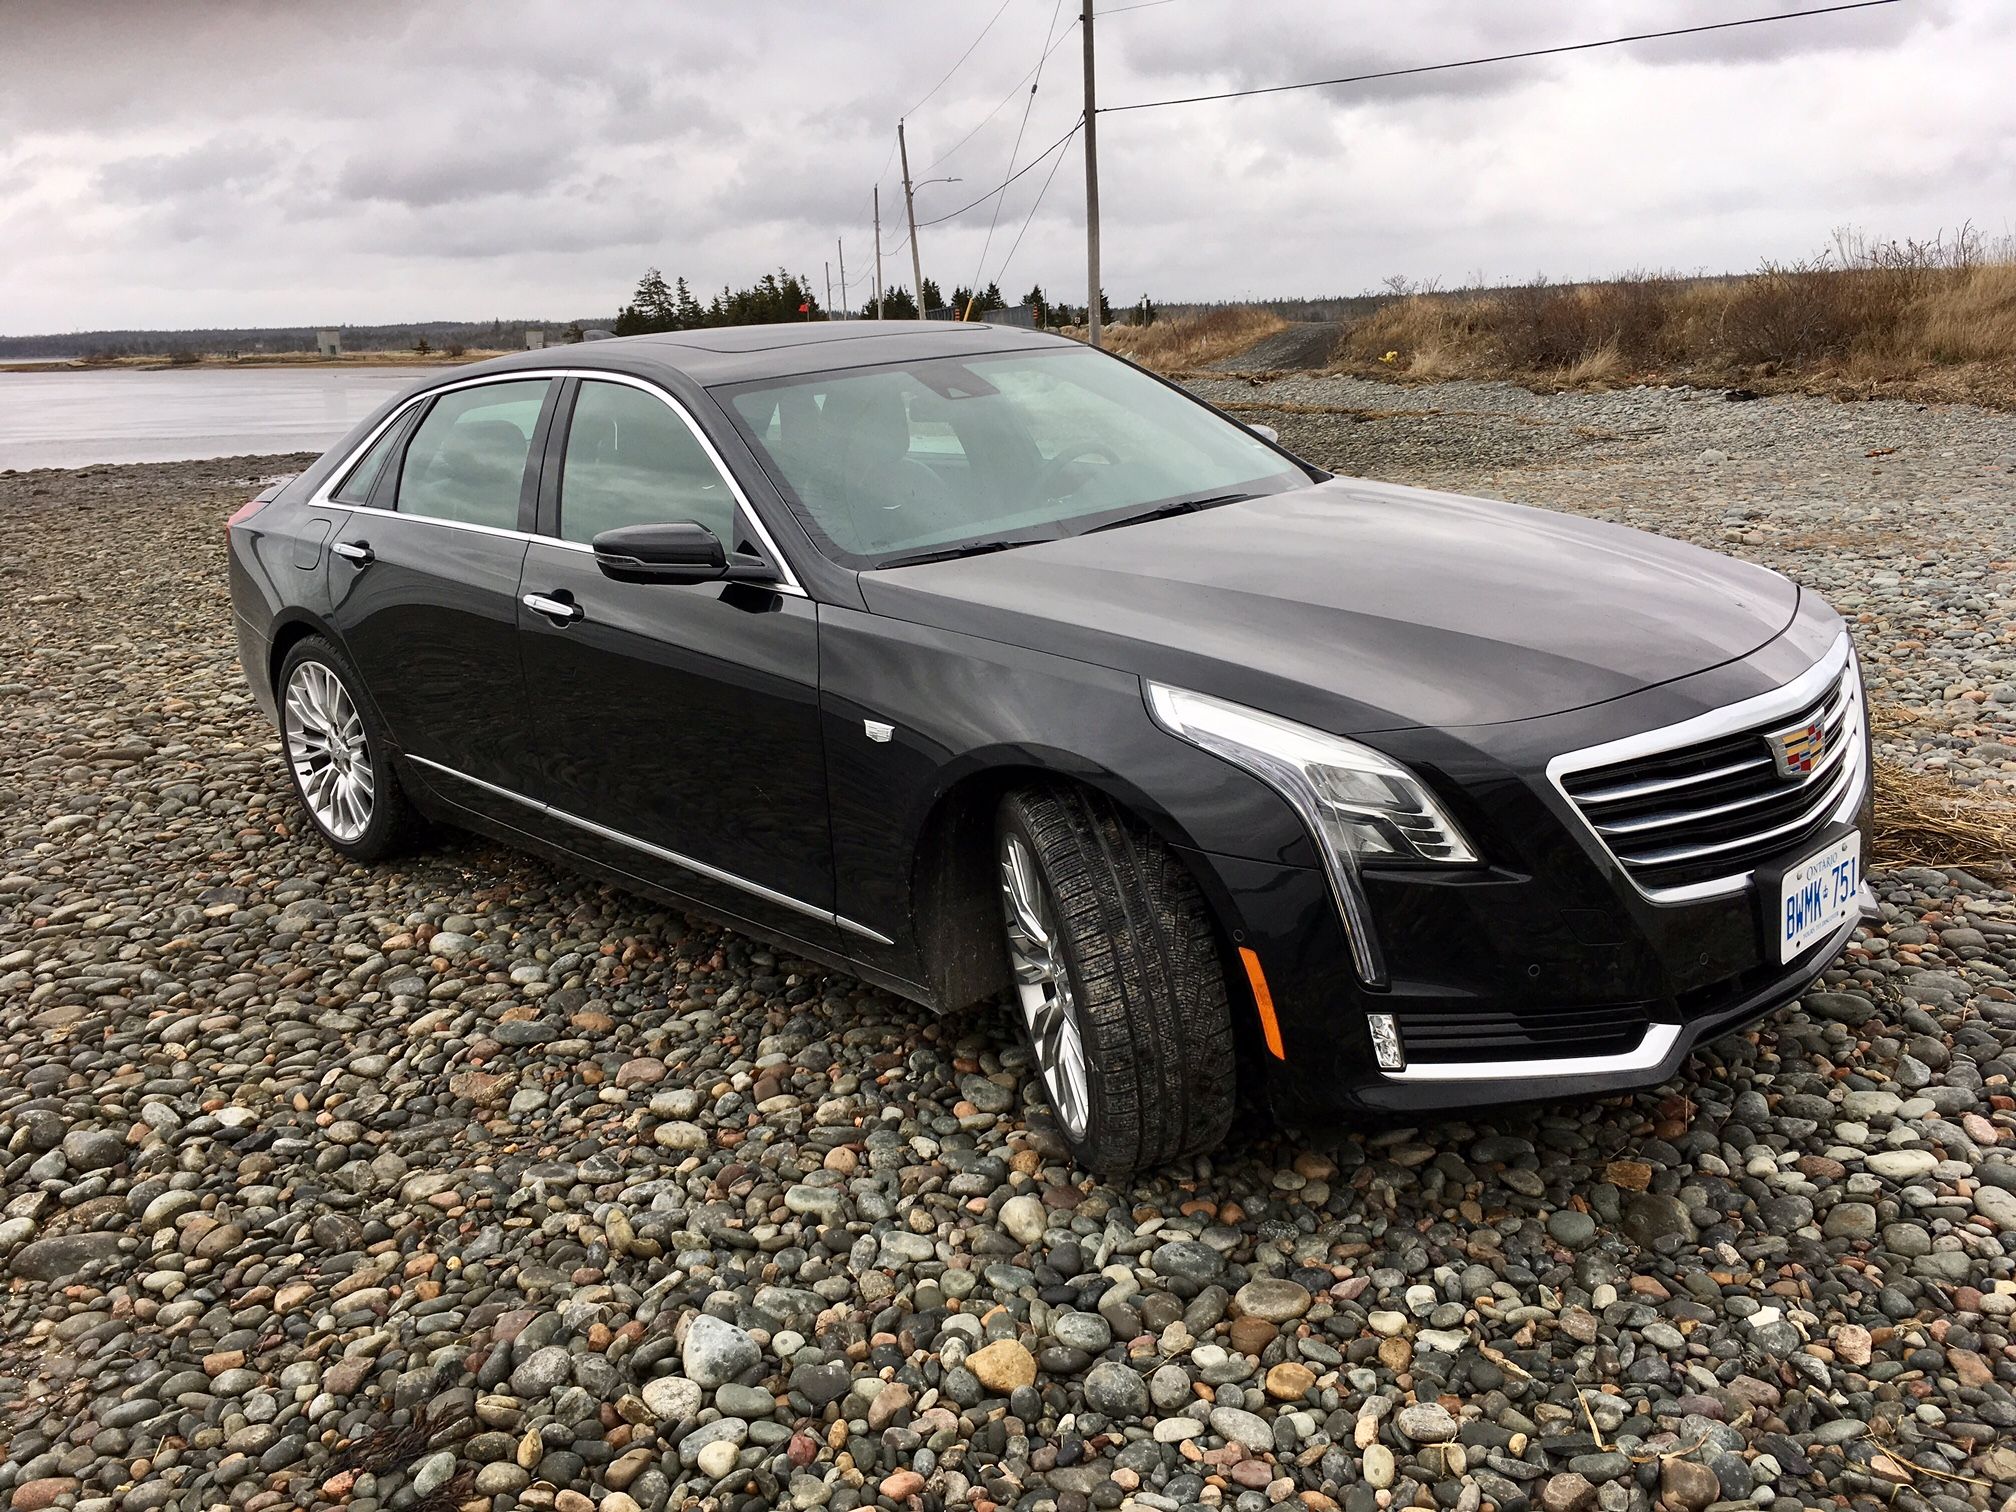 2020 The Cadillac CT6 fails, goes out of production after only four years